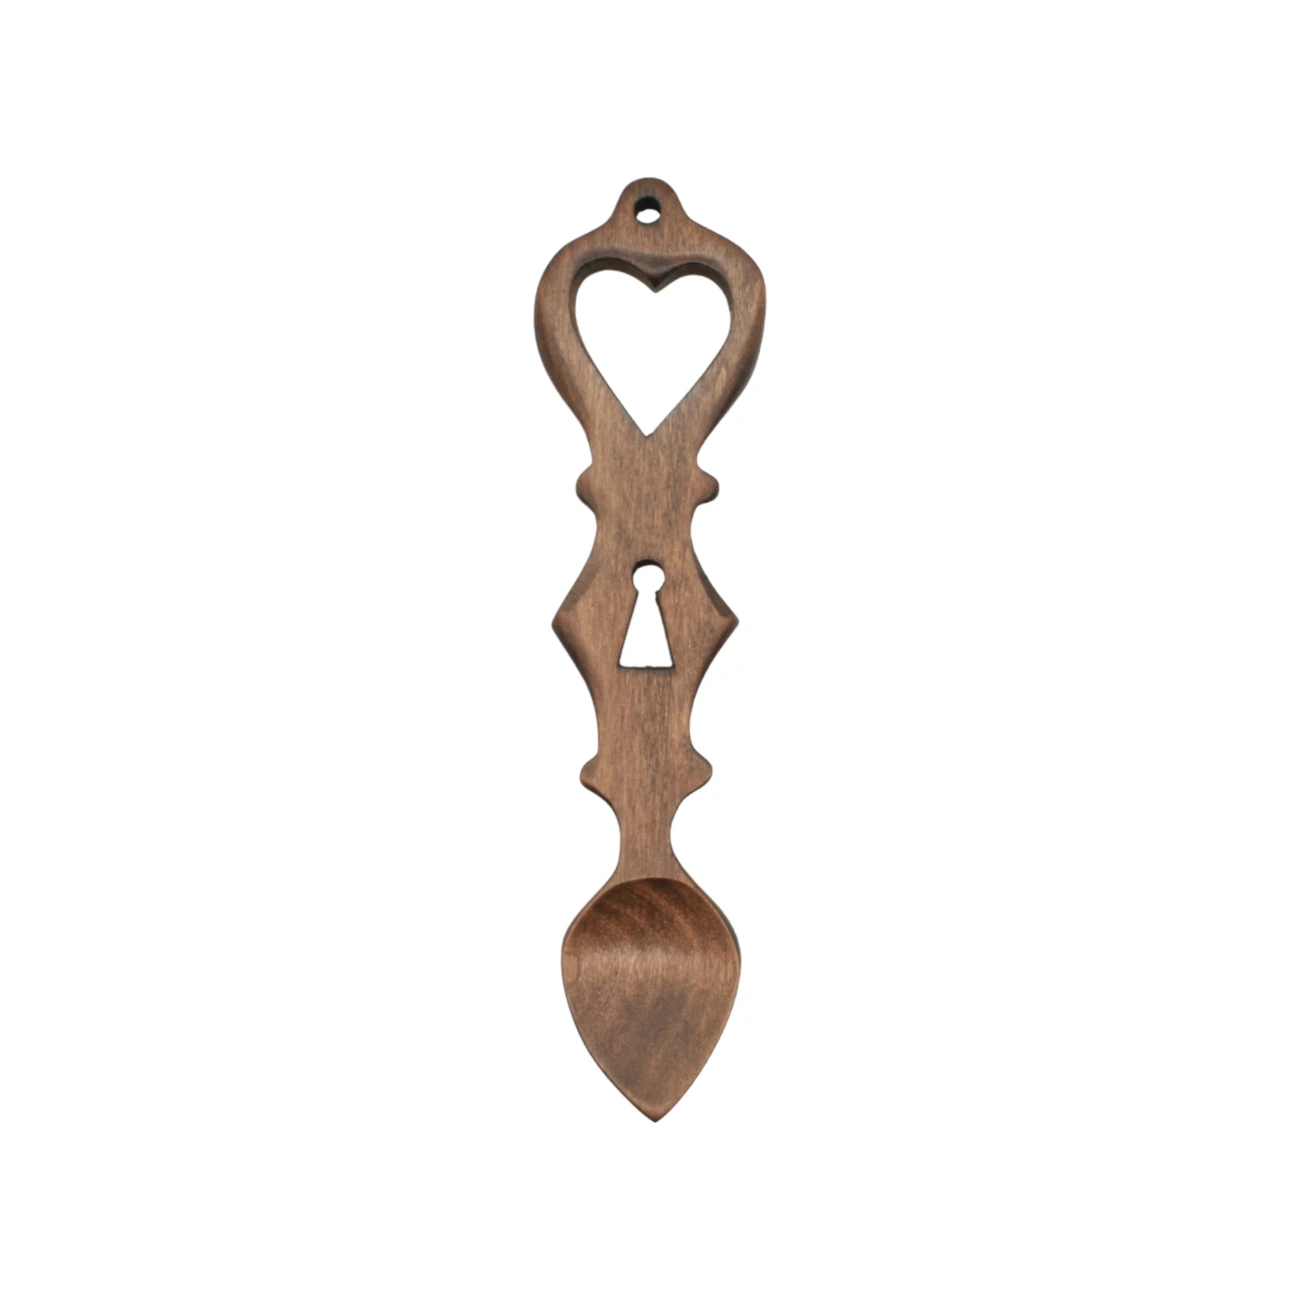 An image of a lovespoon titled Heart & Keyhole Cutout